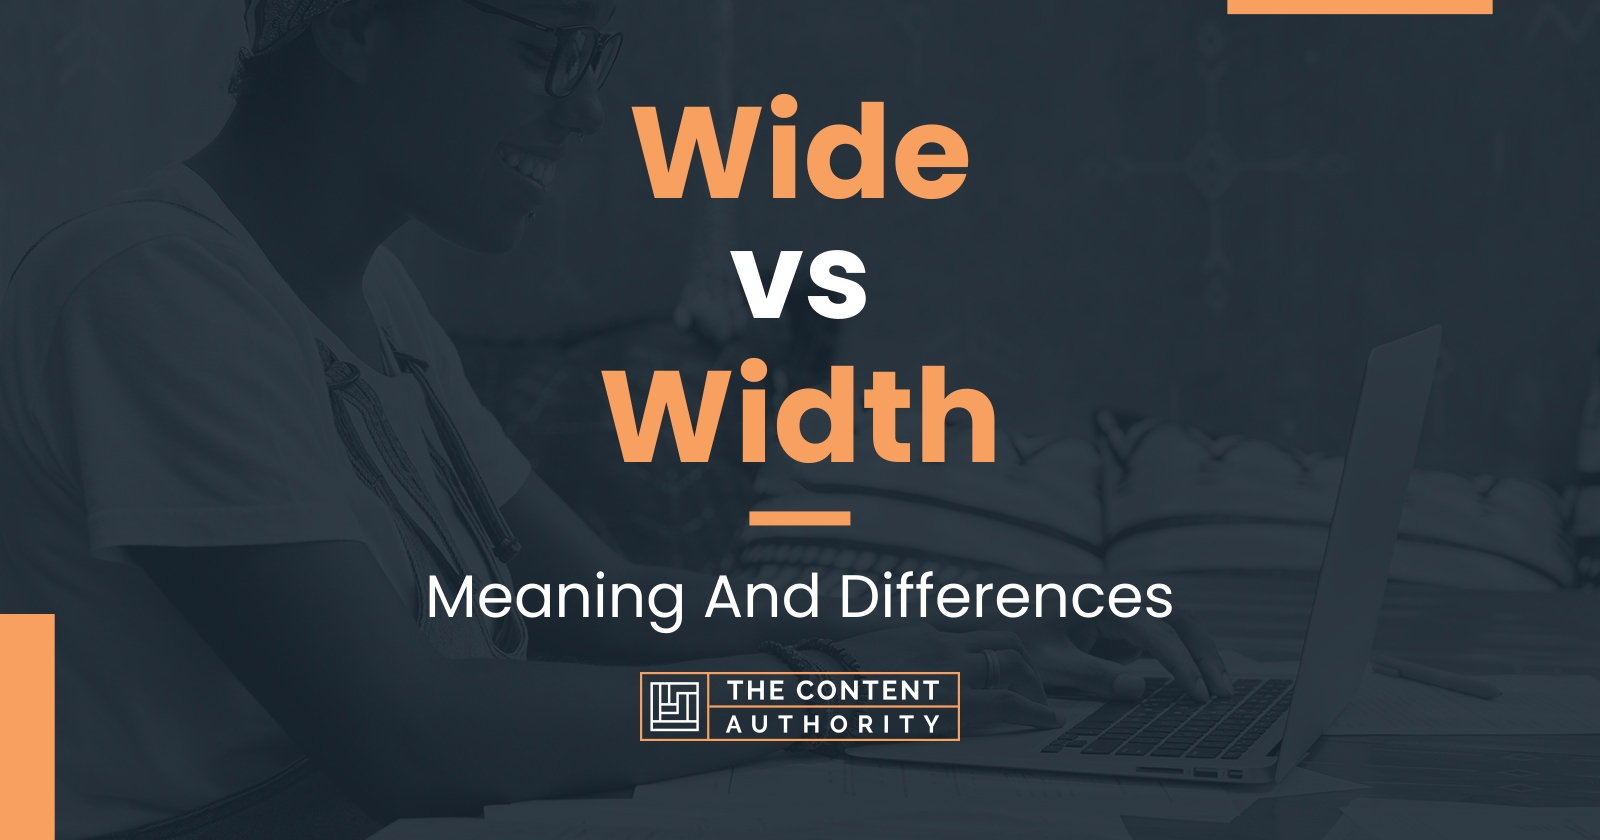 Wide vs Width: Meaning And Differences